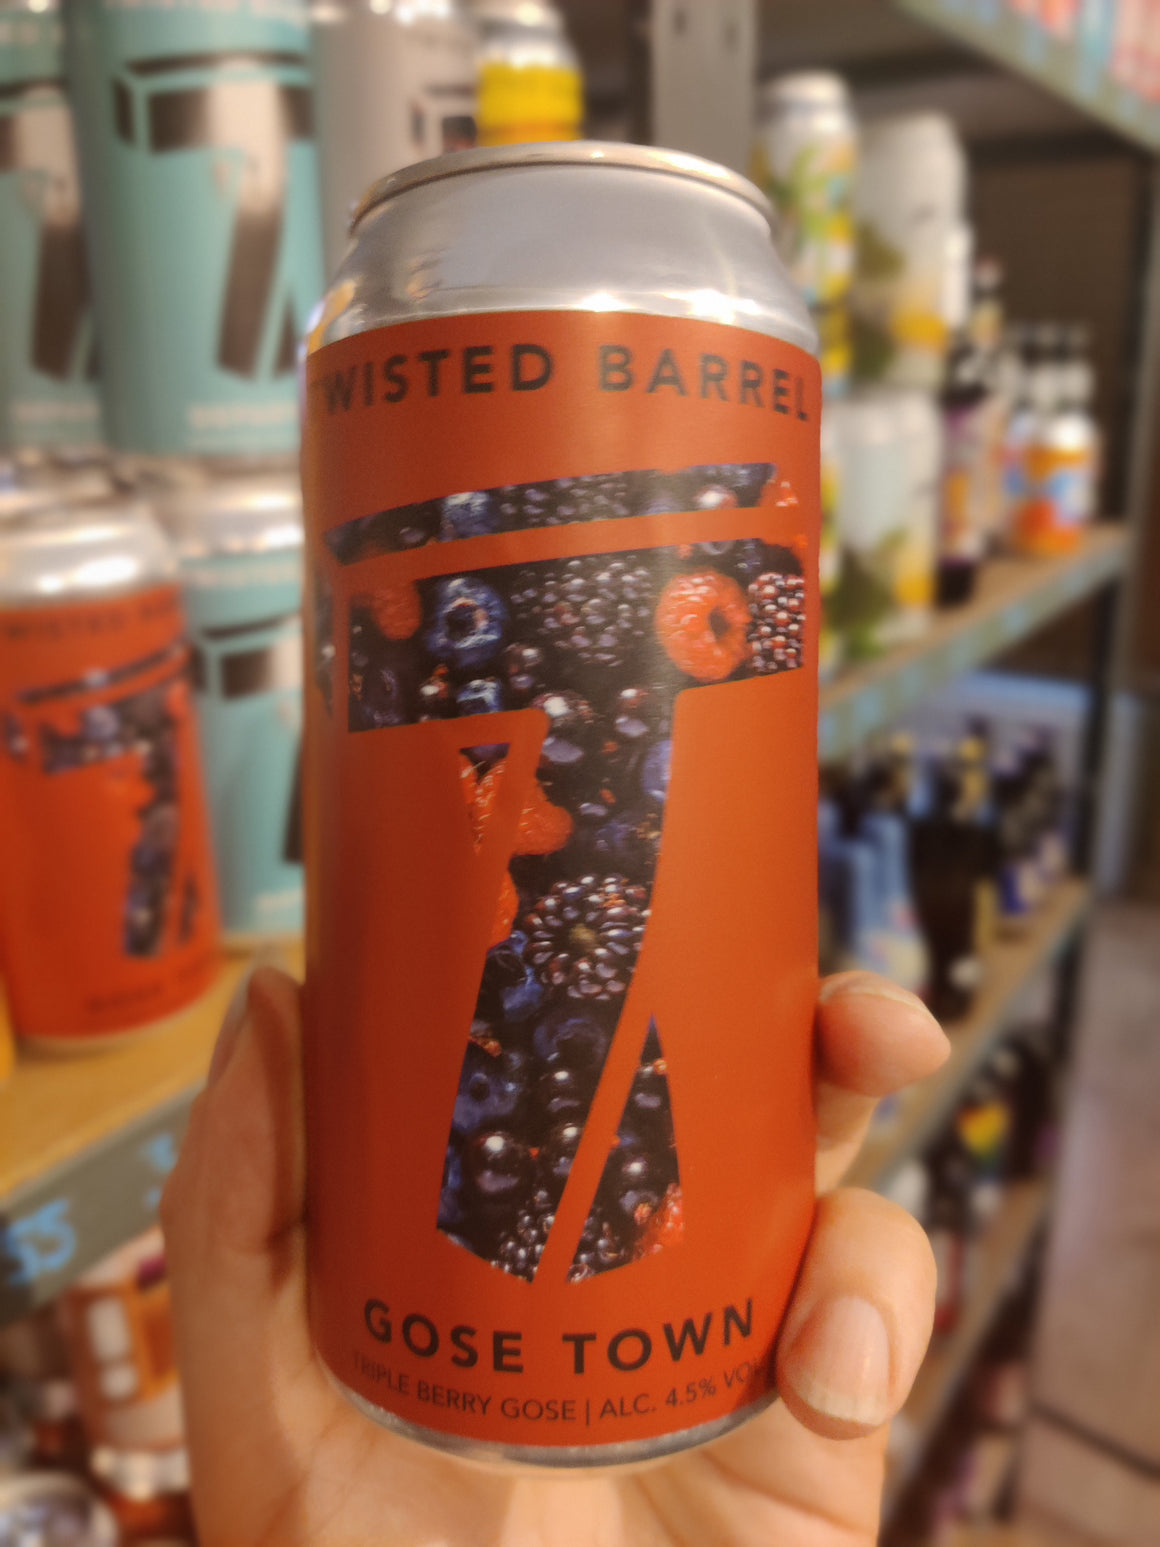 Twisted Barrel Gose Town   4.5%